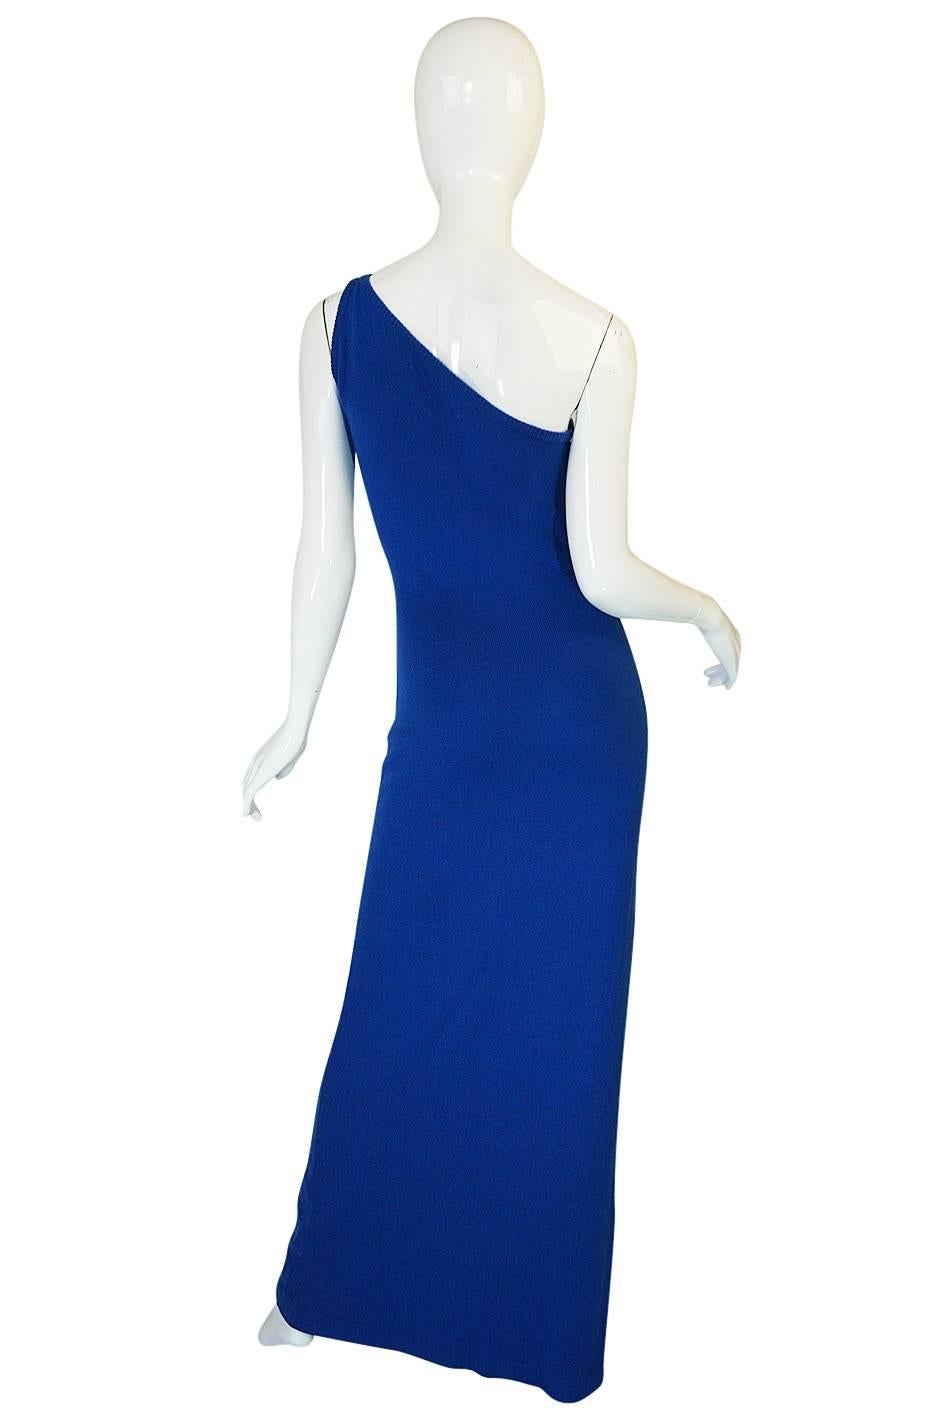 Halston single-handedly transformed cashmere from a dowdy British staple to a fashion must-have. These long, slim dresses made of pure cashmere wool became a Halston staple and were designed for that chic modern woman to wear. The wearer was able to